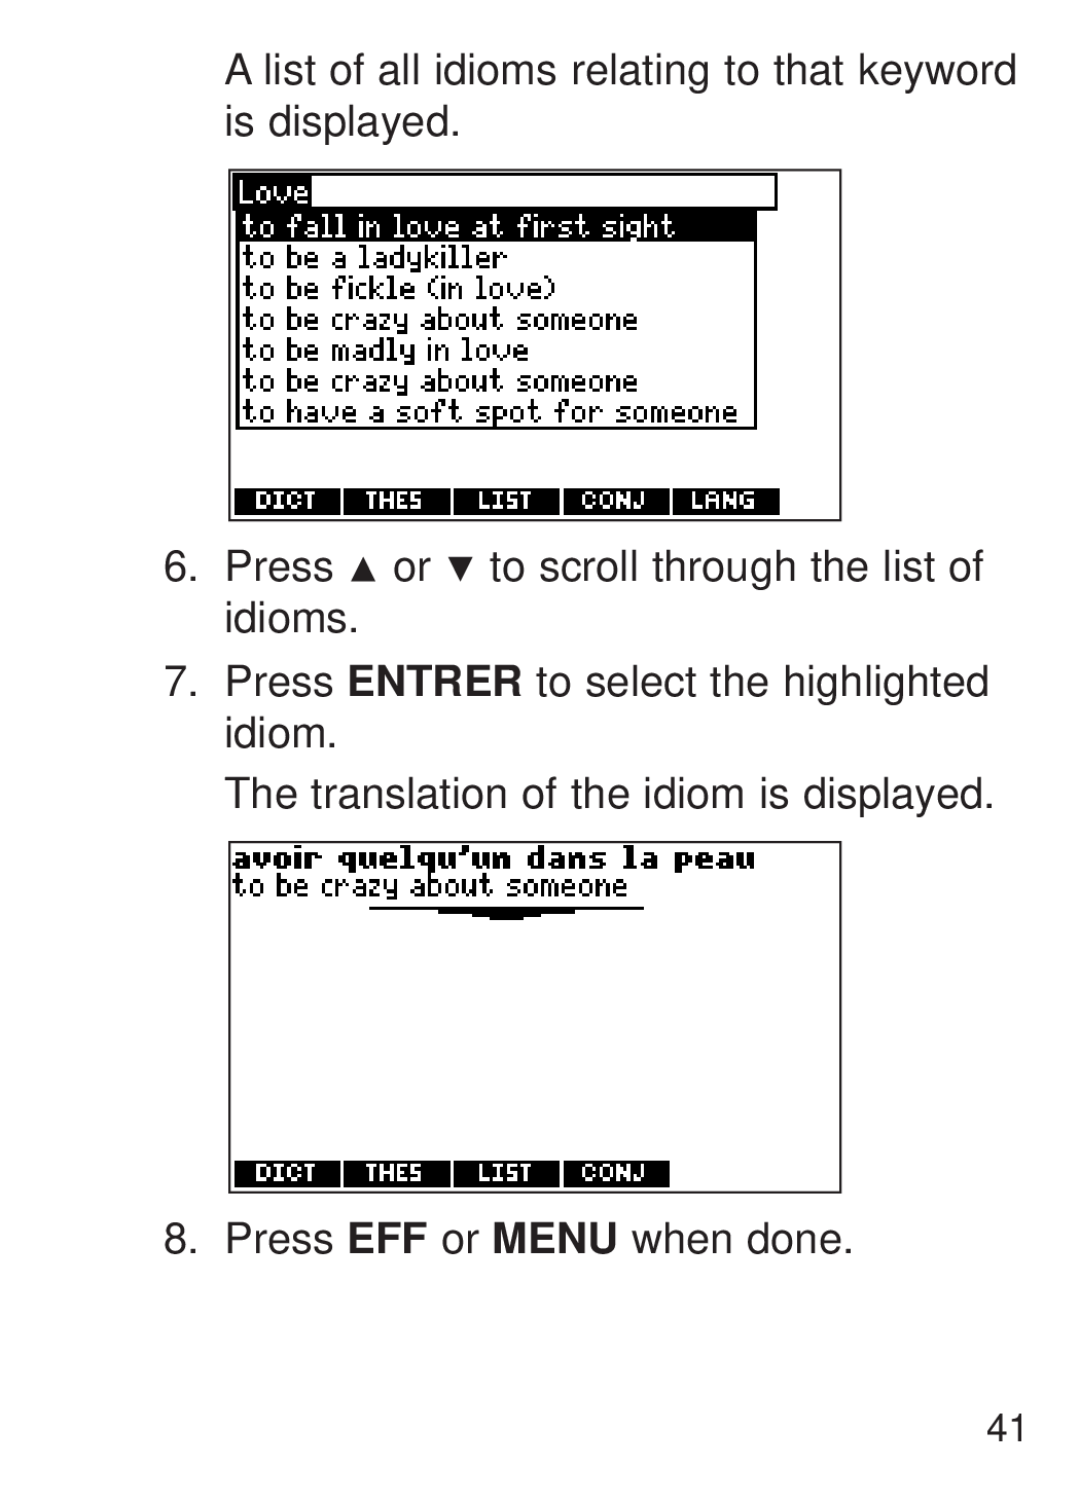 Franklin FQS-1870 manual Press or to scroll through the list of idioms, Press ENTRER to select the highlighted idiom 